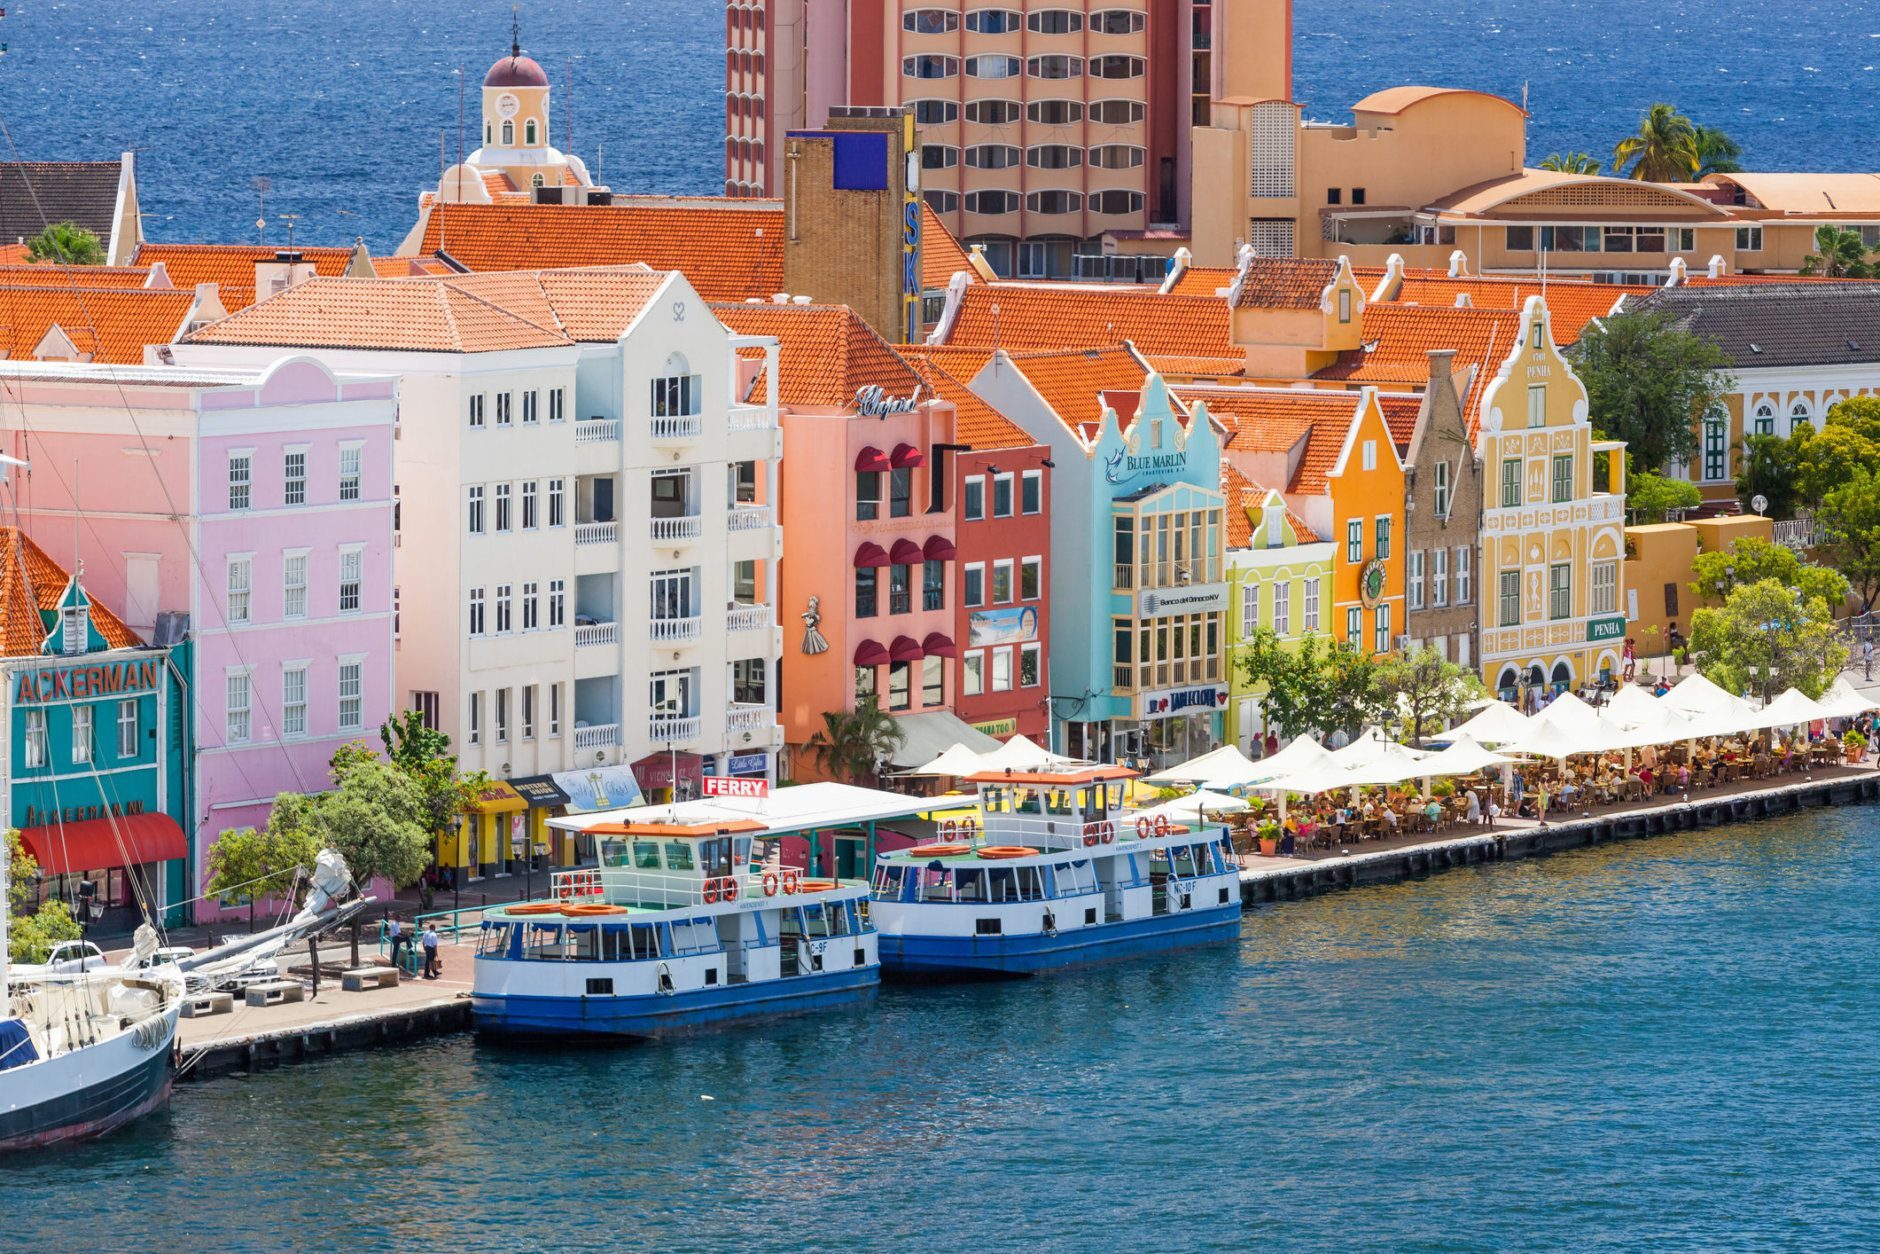 Beautiful architecture  downtown Willemstad, Curacao